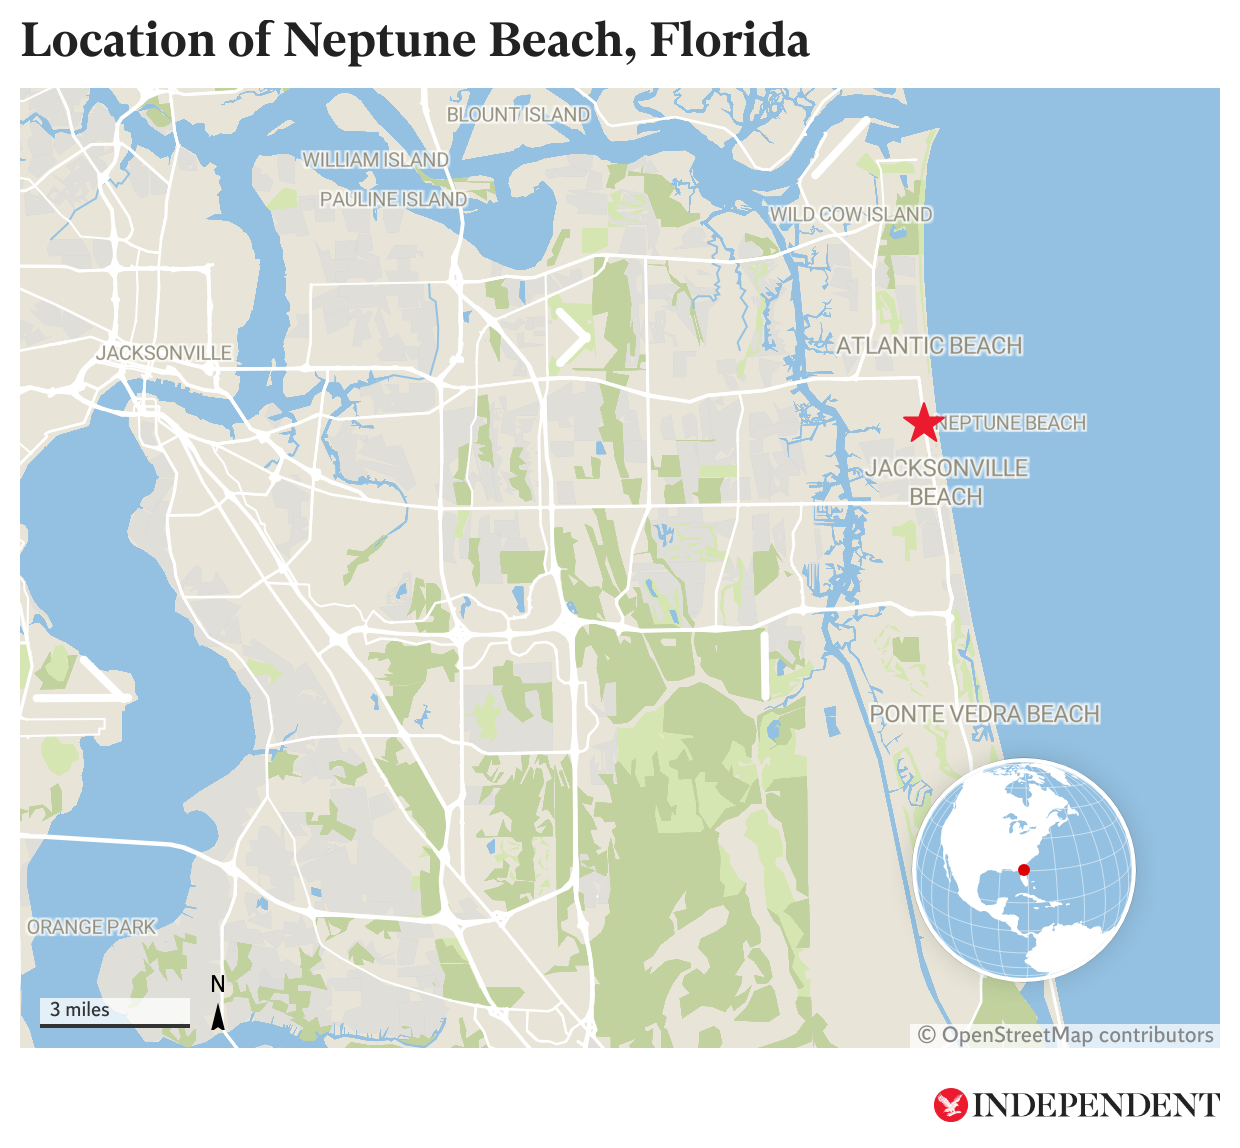 The location of Neptune Beach in northern Florida, where the winning Mega Millions ticket was purchased